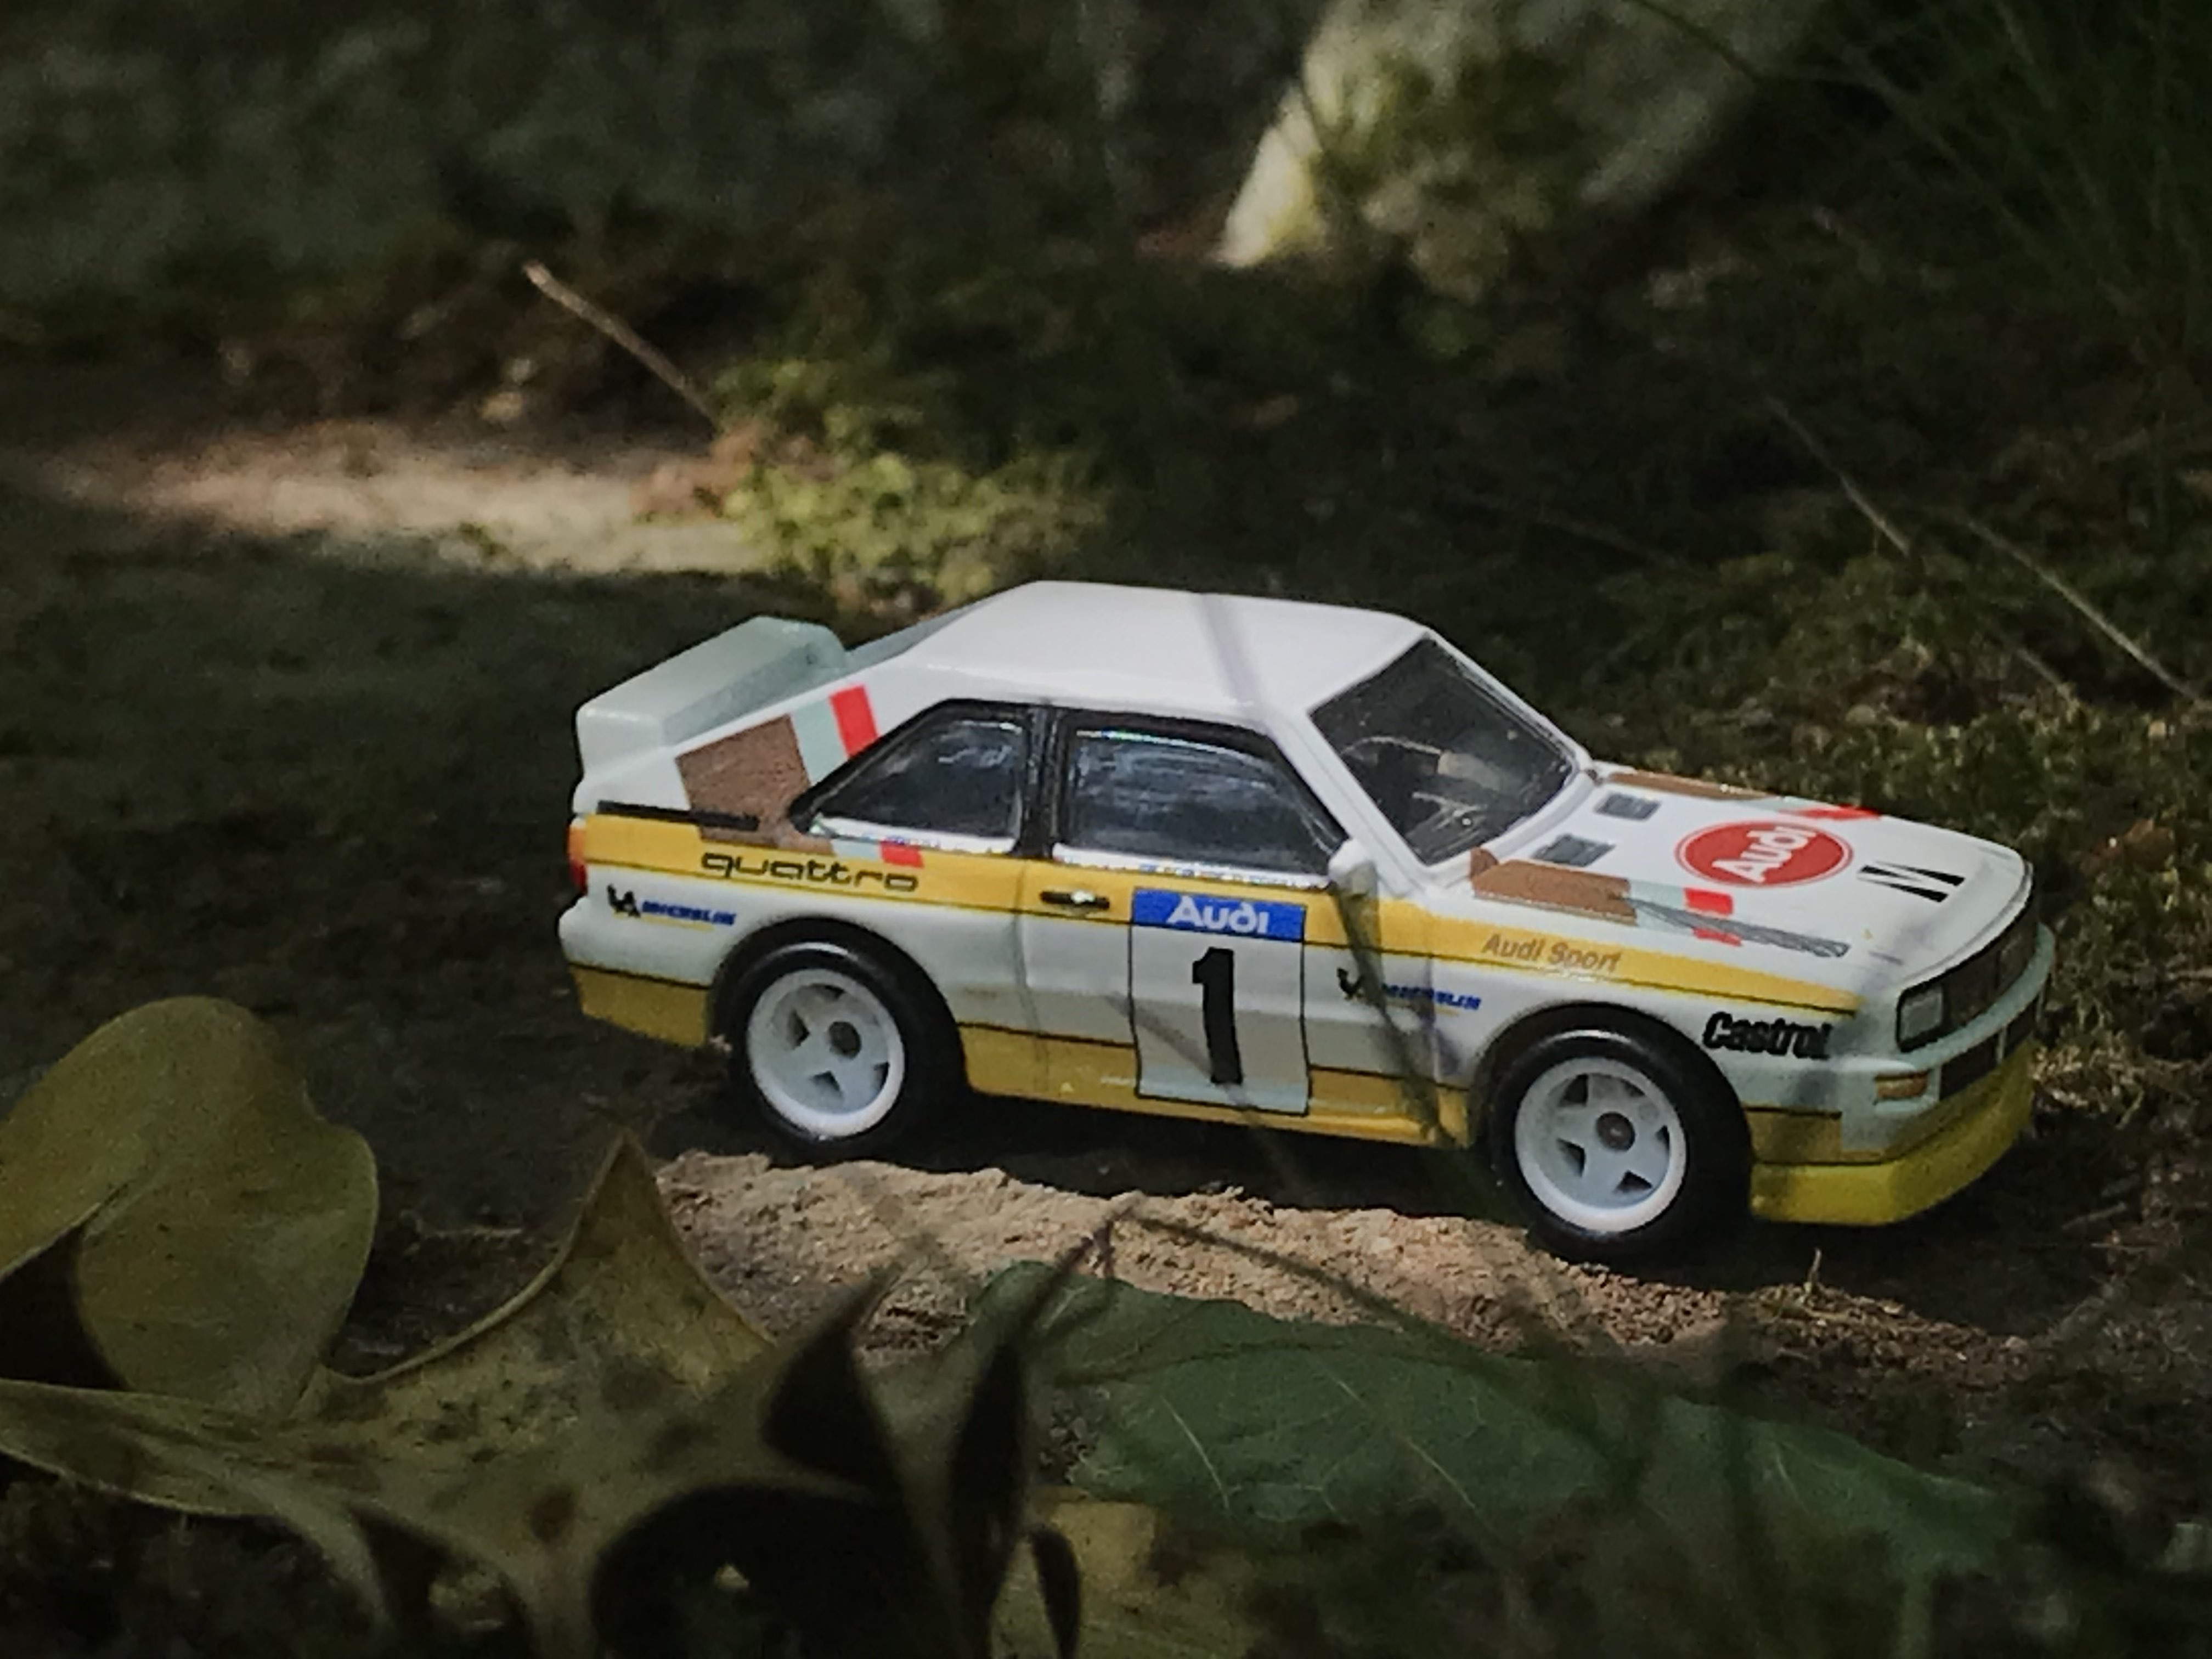 Hotwheels Grp B Rally Audi Quattro behind some leaves, with a beam of sunlight on it [BARx - Overdrive]